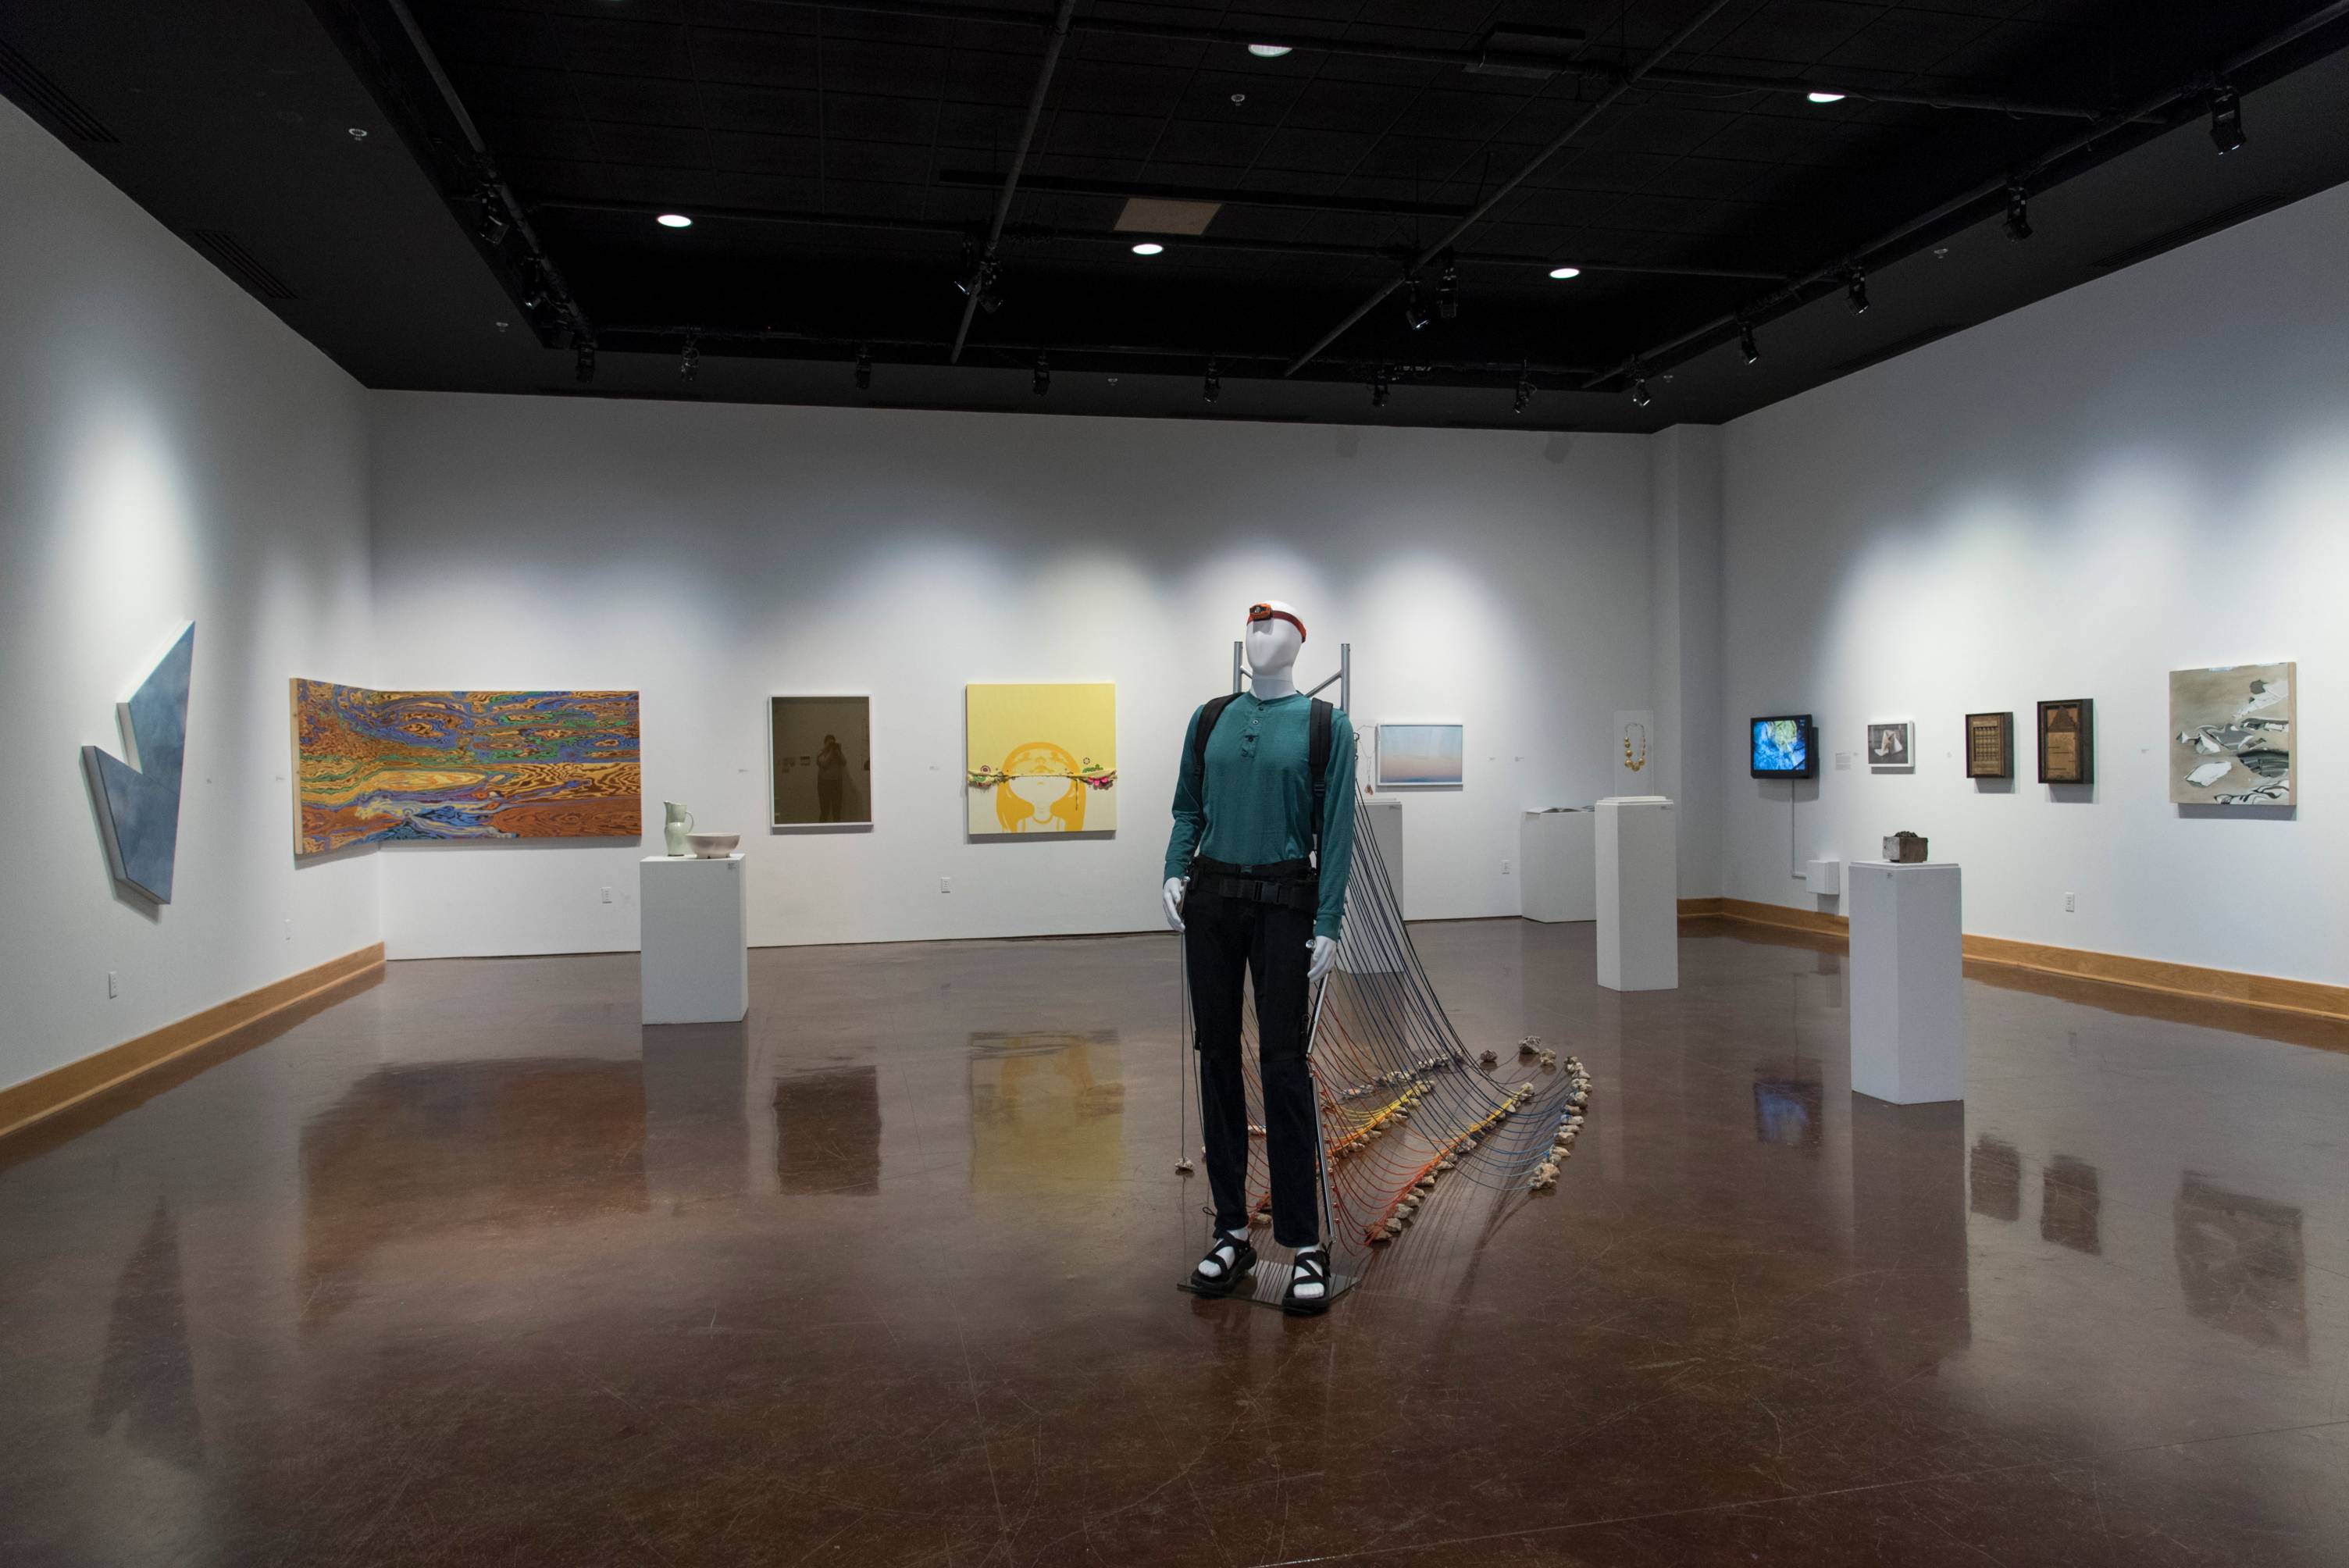 Texas State [TXST] Galleries with art exhibit in progress